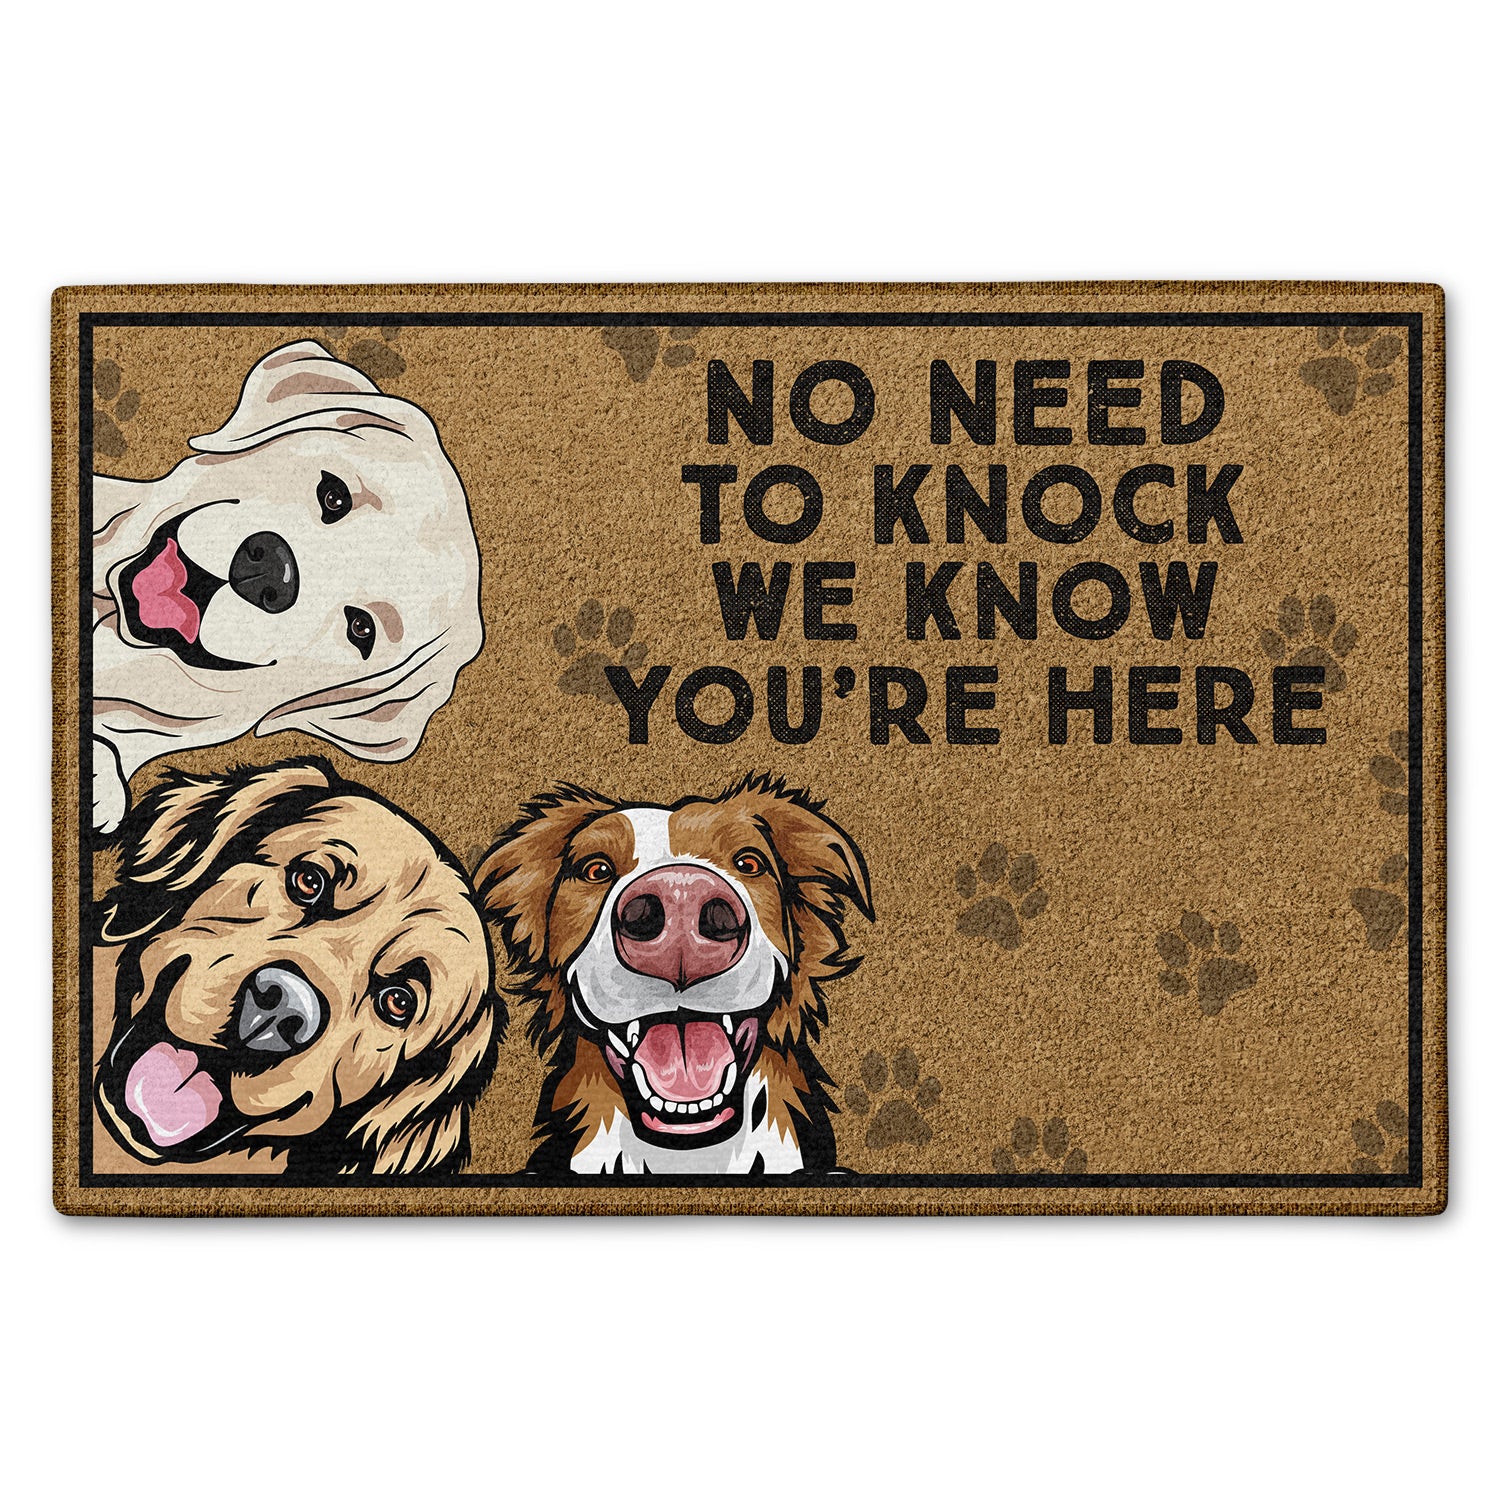 No Need To Knock We Know You're Here - Home Decor, Birthday, Housewarming Gift For Dog Lovers & Cat Lovers - Personalized Custom Doormat